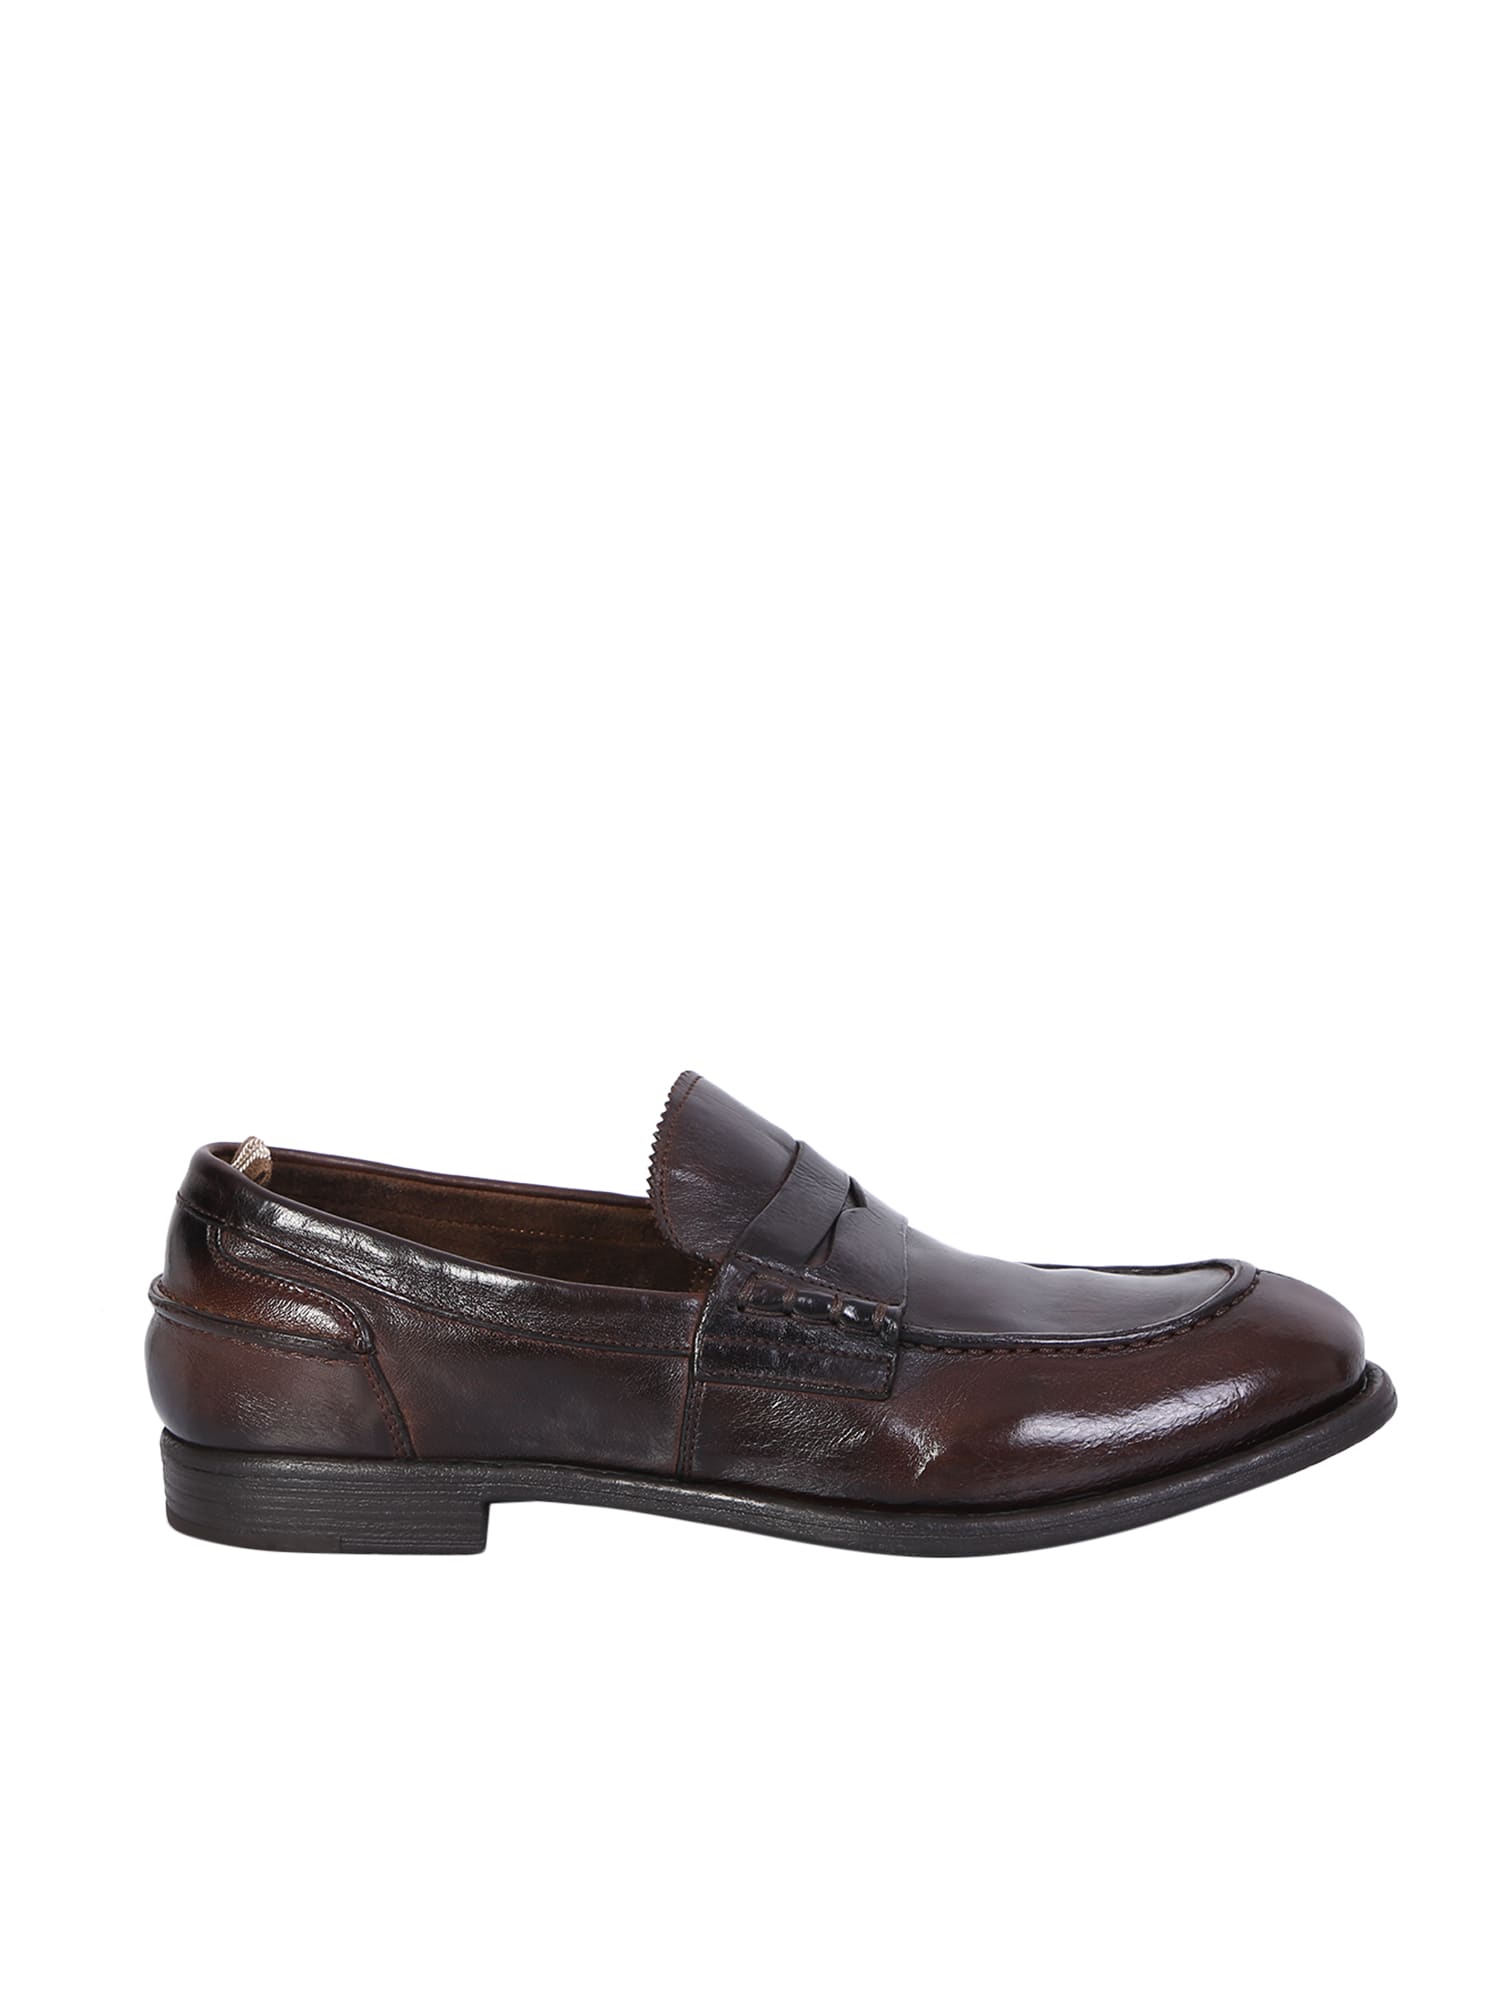 OFFICINE CREATIVE CHRONICLE 144 LOAFERS